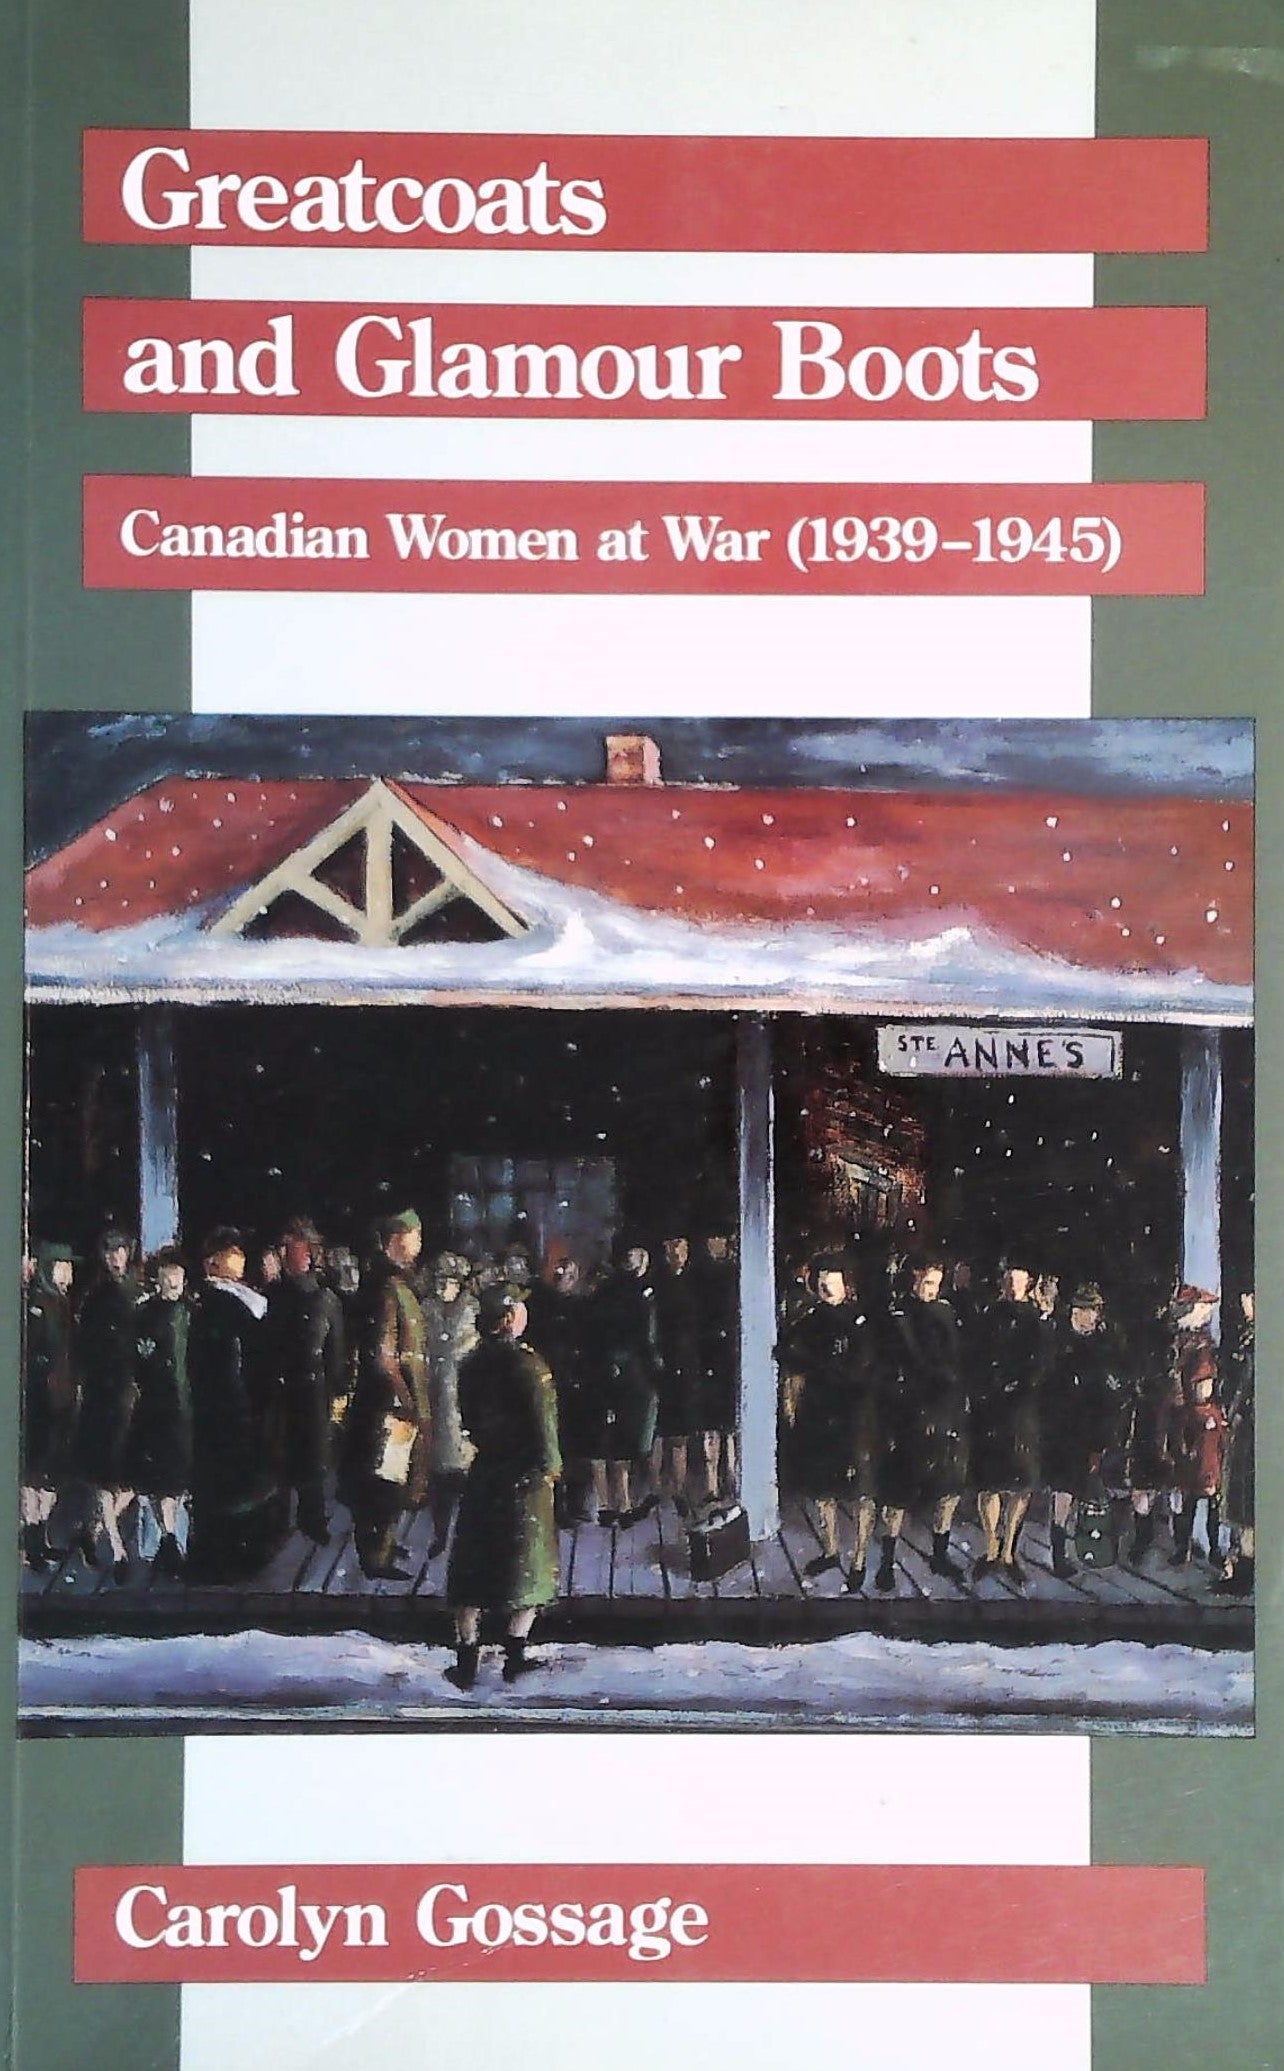 Livre ISBN 1550020951 Greatcoats and Glamour Boots: Canadian Women at War, 1939-1945 (Carolyn Gossage)